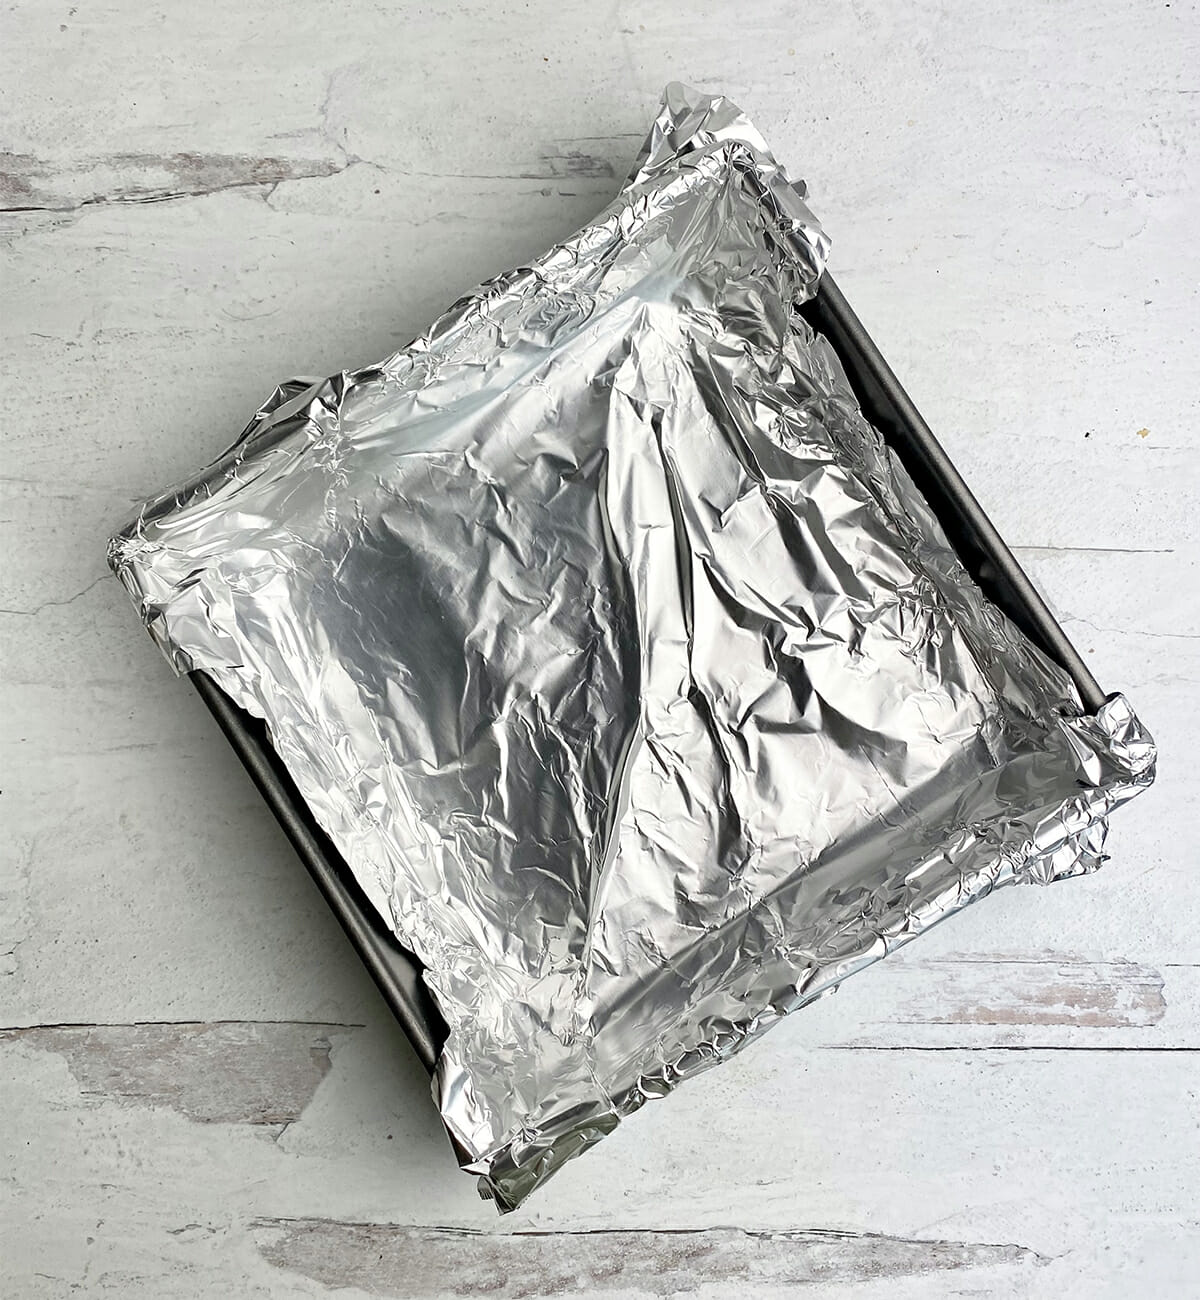 Foil lined jam cake pan on a wooden counter.